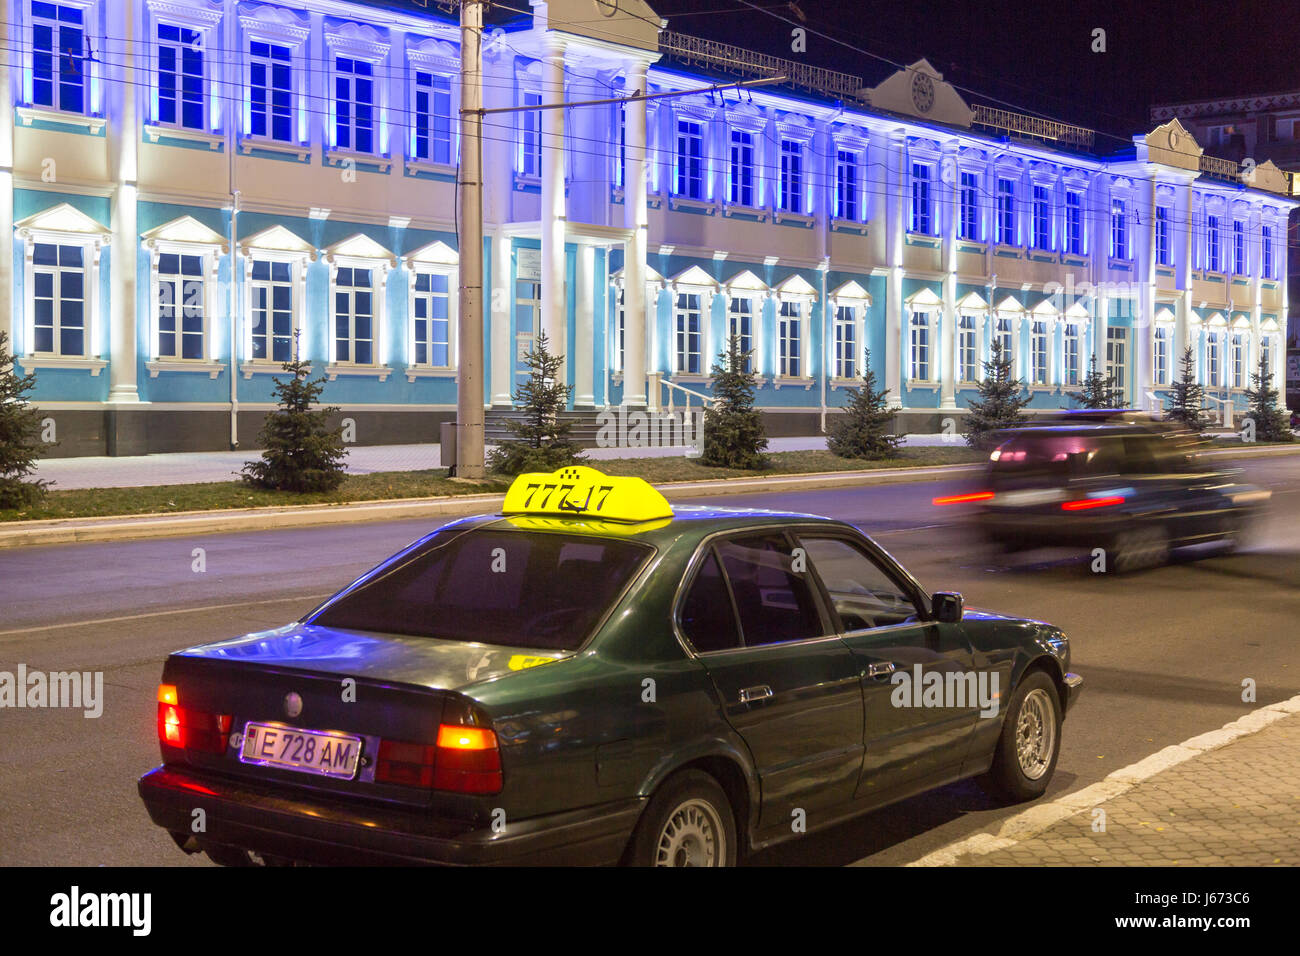 24.08.2016, Moldova, Transnistria, Tiraspol - Taxi on the central main street of the 25th October. Other street: the medical center. Transnistria is a repulsive Moldovan republic under Russian influence east of the river Dnister. The region split from Moldova in 1992 and is not recognized by any other country. Even the Russian-dependent entity is known as the Transdnestrovian Moldavian Republic (Pridnestrovkaja Moldavskaja Respublika / PMR). Tiraspol is the capital. 00A160824D416CAROEX.JPG - NOT for SALE in G E R M A N Y, A U S T R I A, S W I T Z E R L A N D [MODEL RELEASE: NOT APPLICABLE, PRO Stock Photo